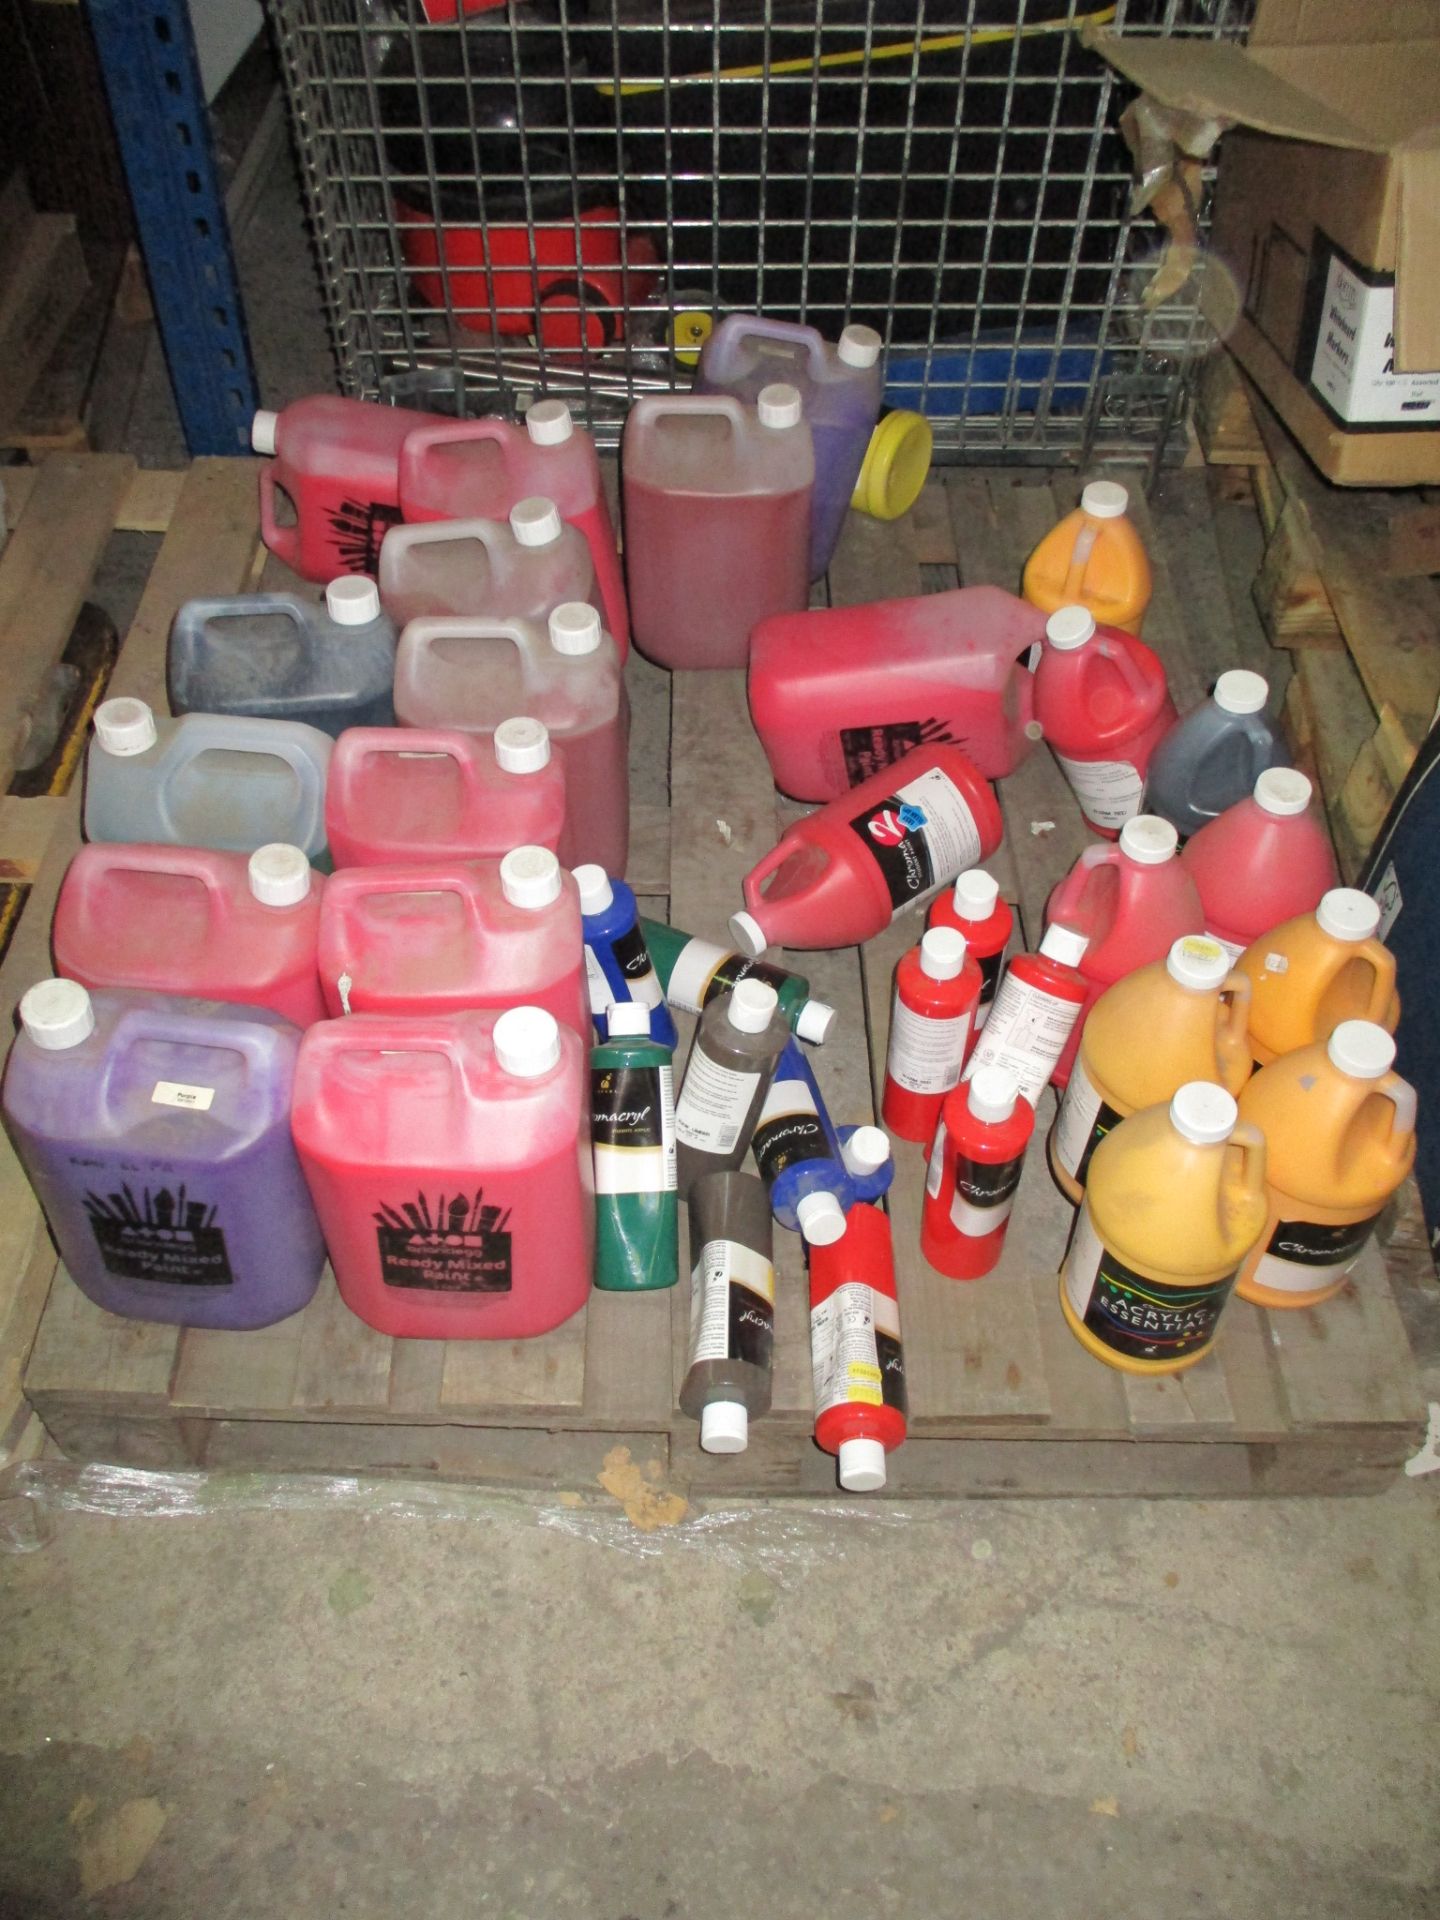 Job Lot of Brian Clegg Arts and Crafts Paint 20+ Bottles - Massive RRP